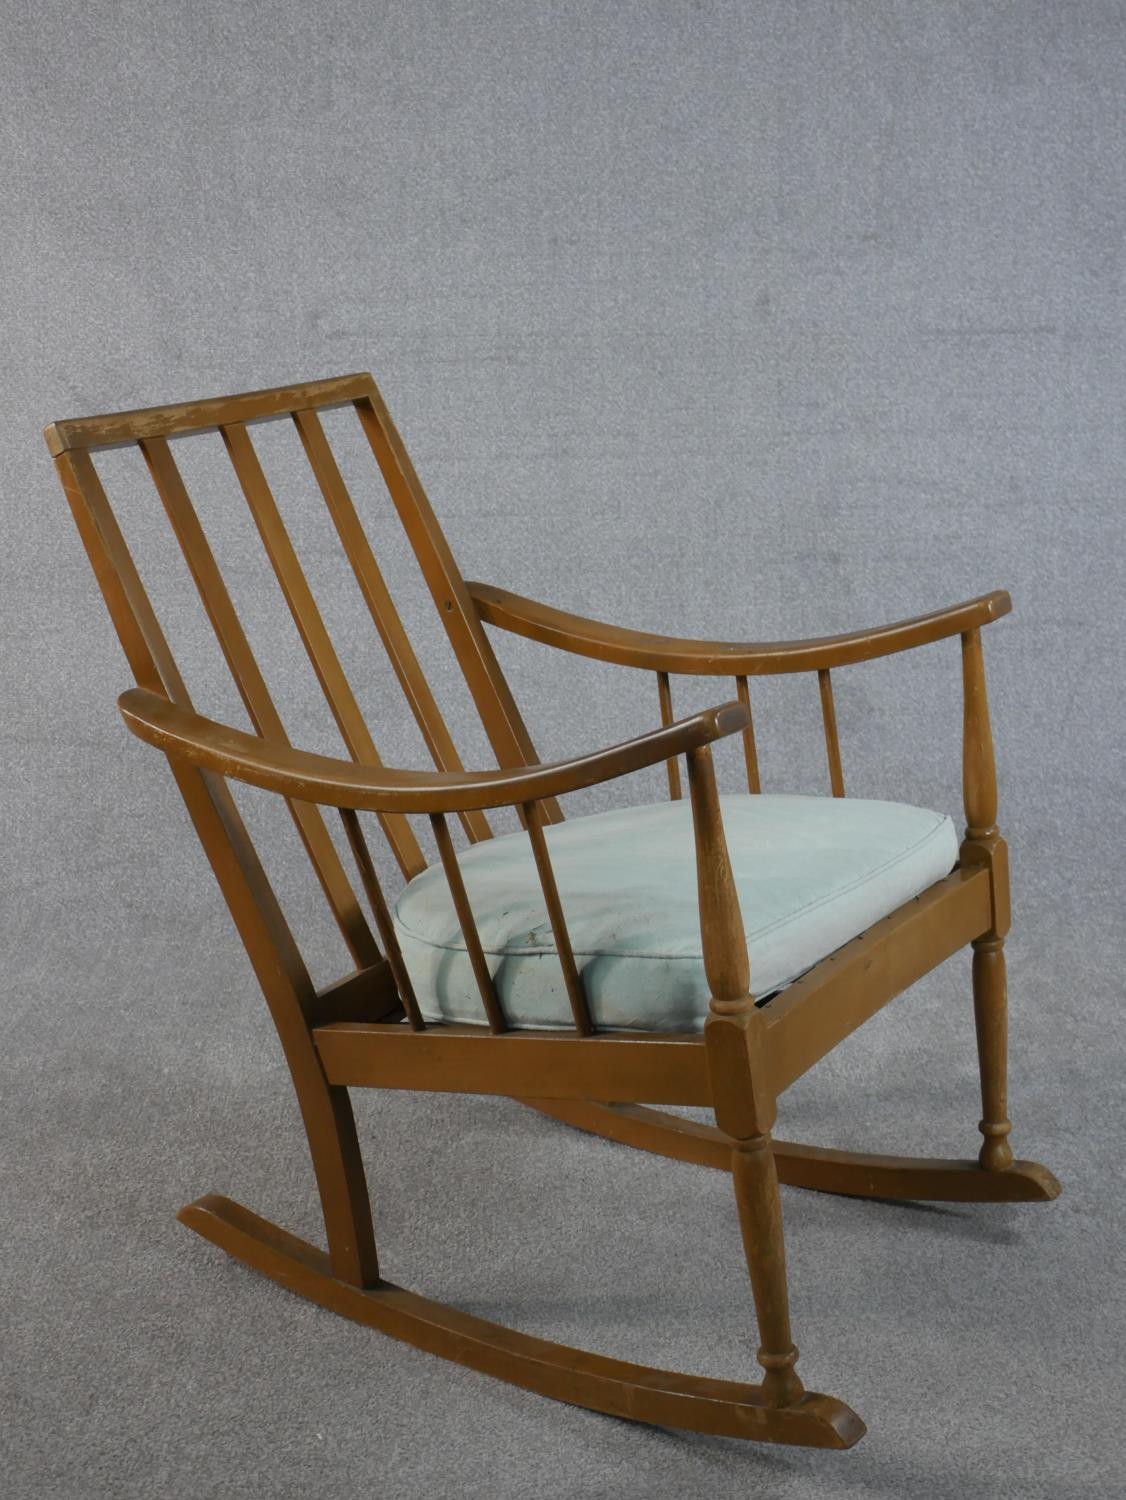 A mid 20th century beech rocking chair, with a spindle back and a blue upholstered loose cushion, on - Image 5 of 5